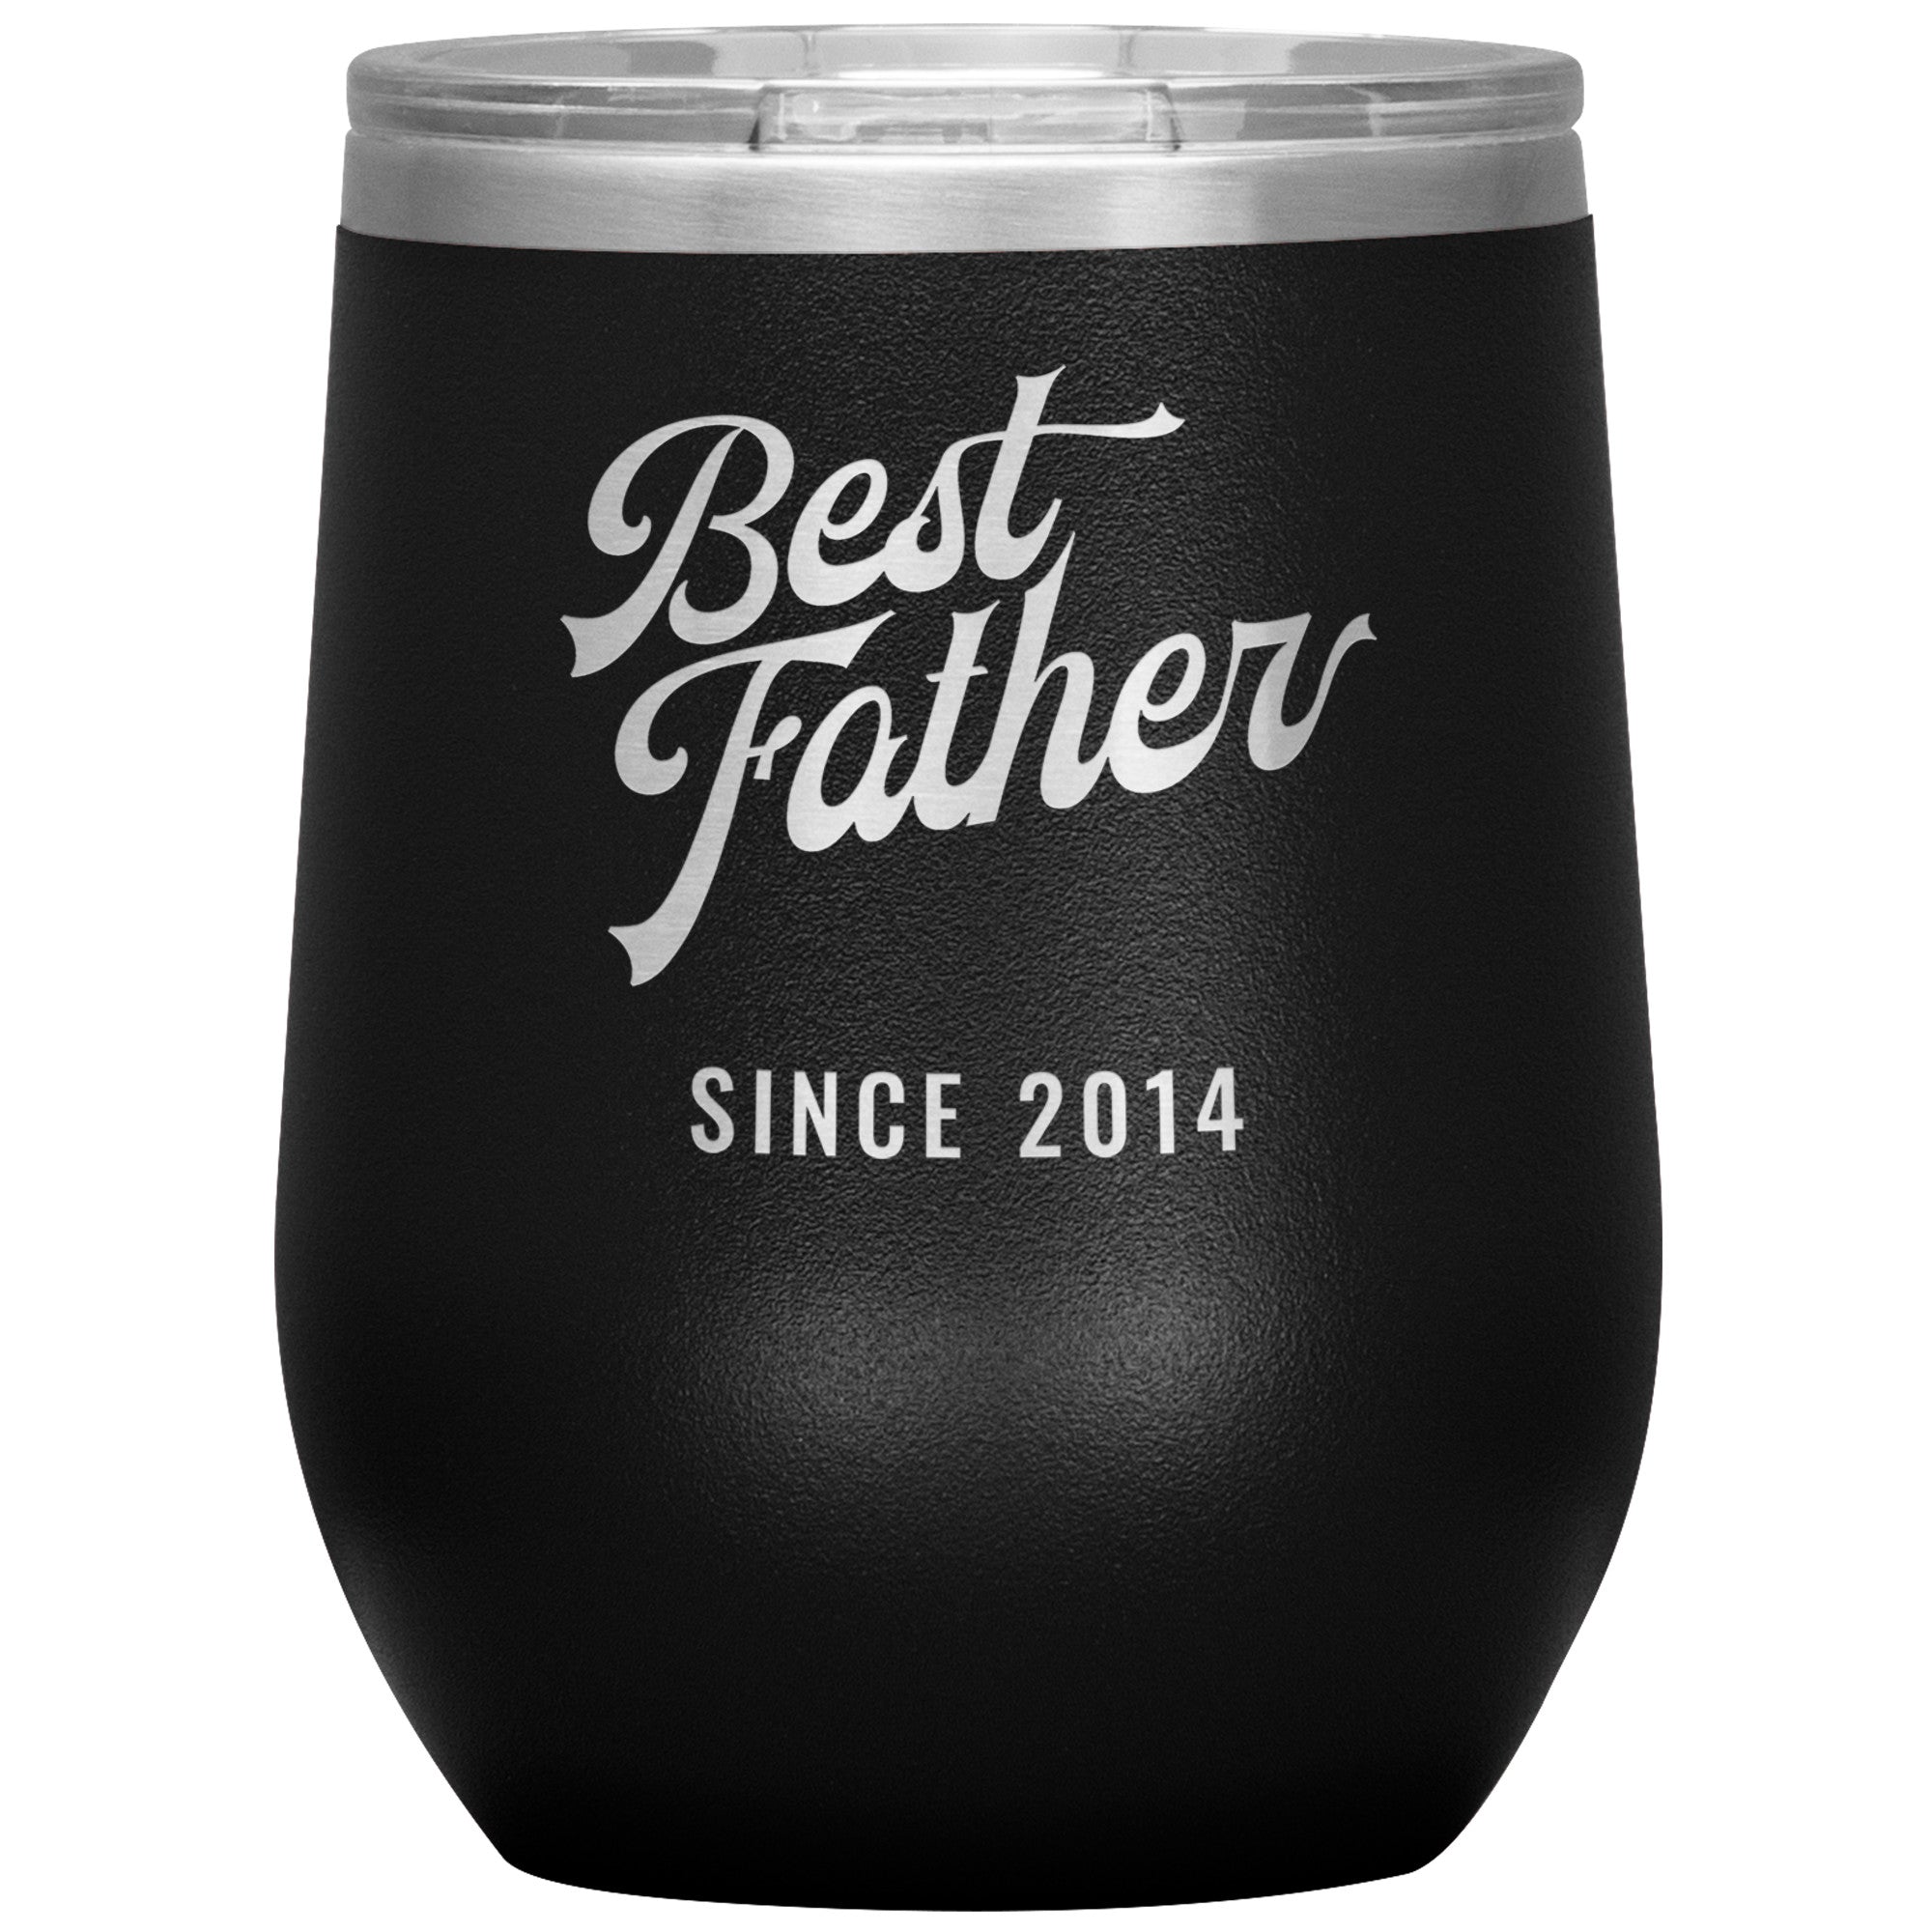 Best Father Since 2014 - 12oz Insulated Wine Tumbler